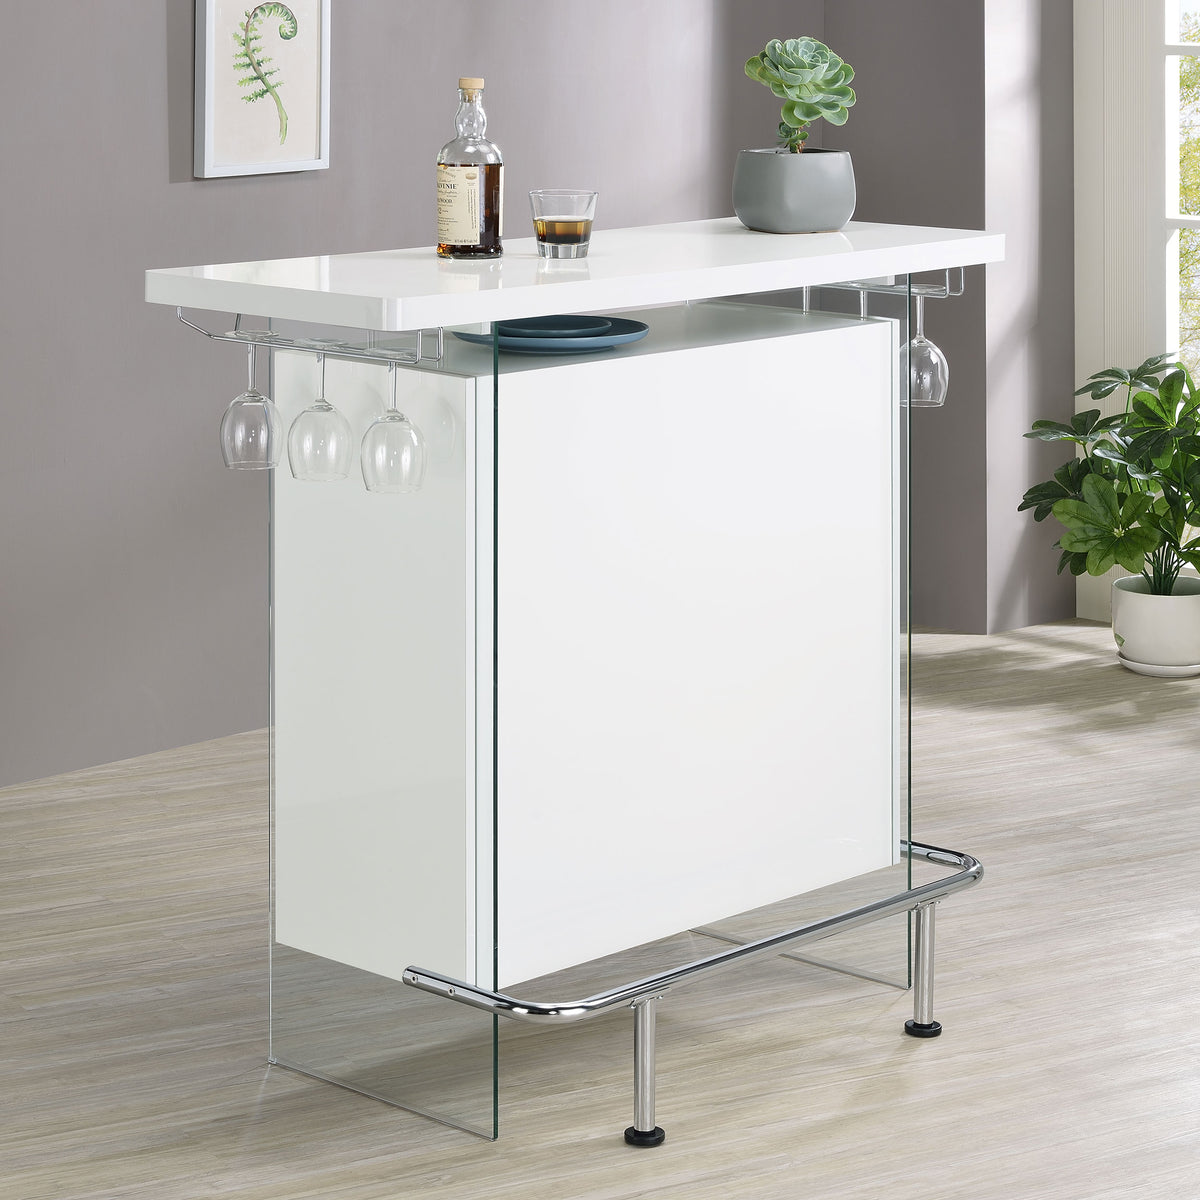 Acosta Rectangular Bar Unit with Footrest and Glass Side Panels - Half Price Furniture